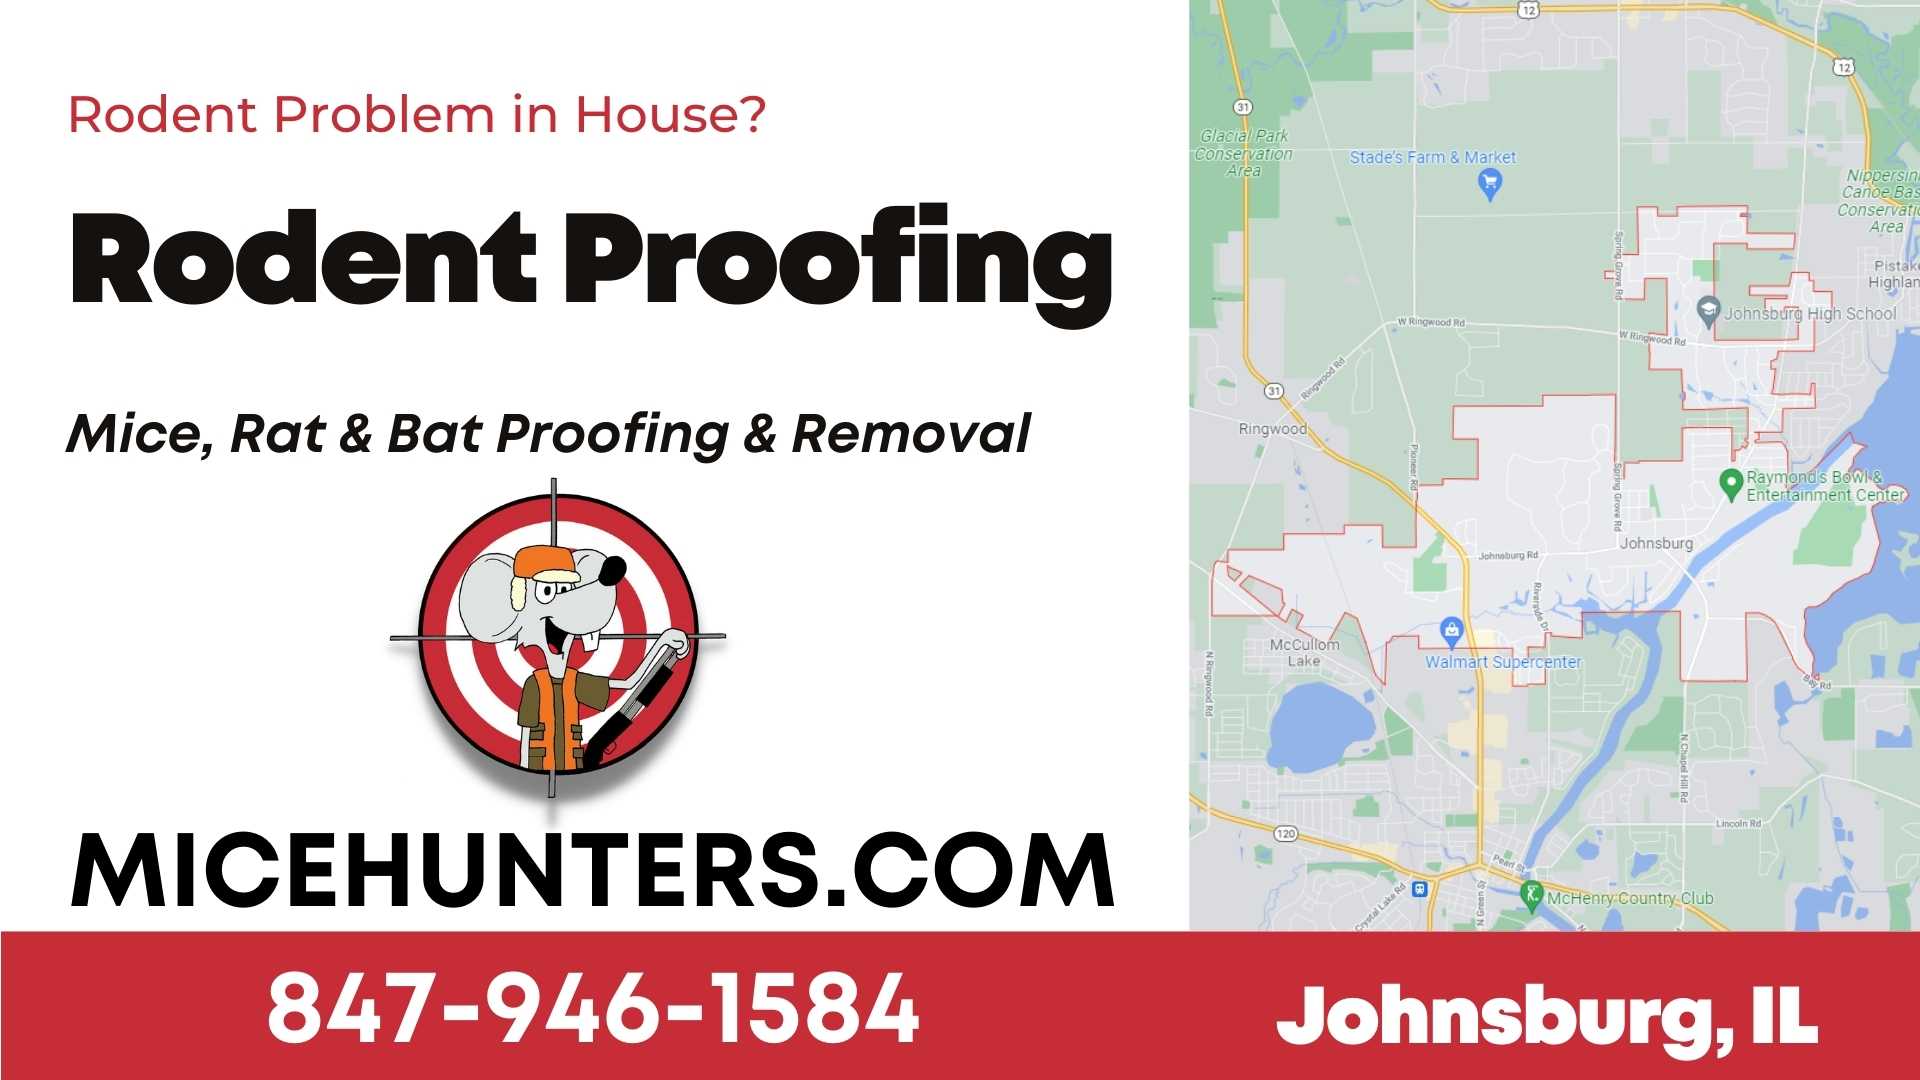 Johnsburg Rodent and Mice Proofing Exterminator